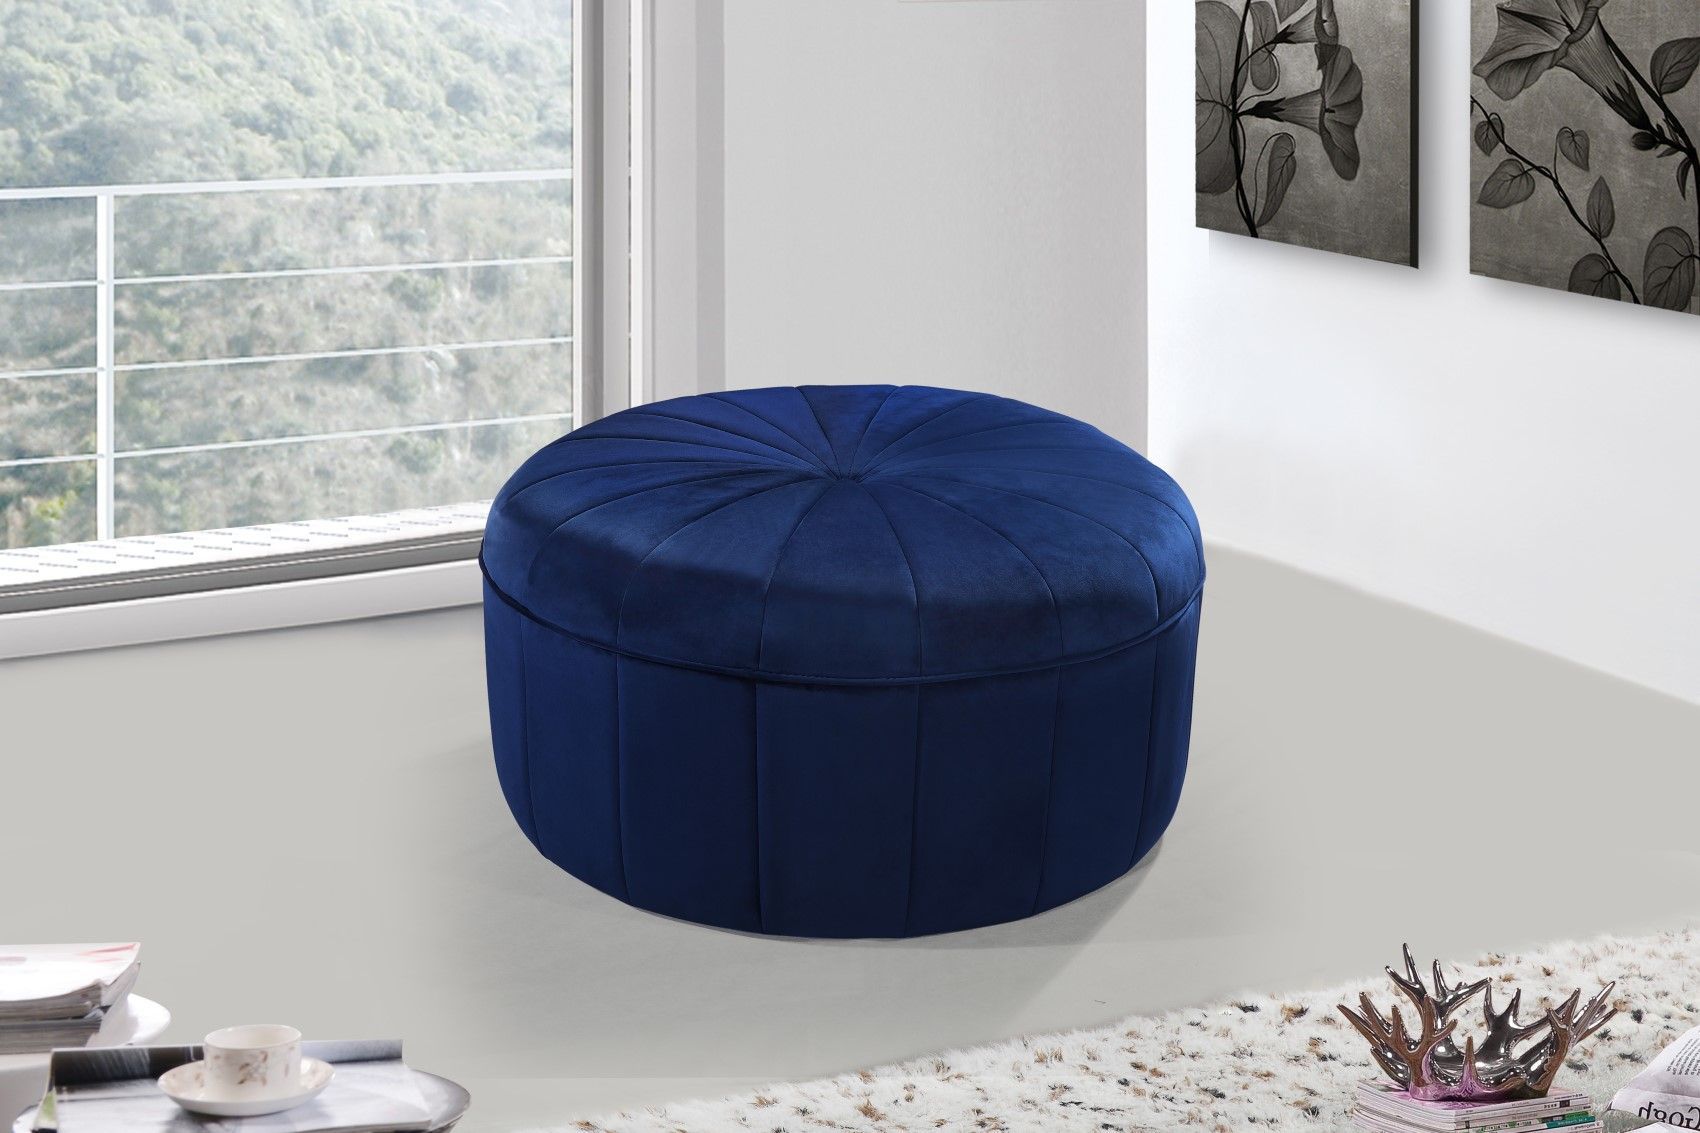 Thane Contemporary Round Ottoman Bench In Navy Blue Channel Tufted Velvet Intended For Navy Velvet Fabric Benches (View 1 of 20)